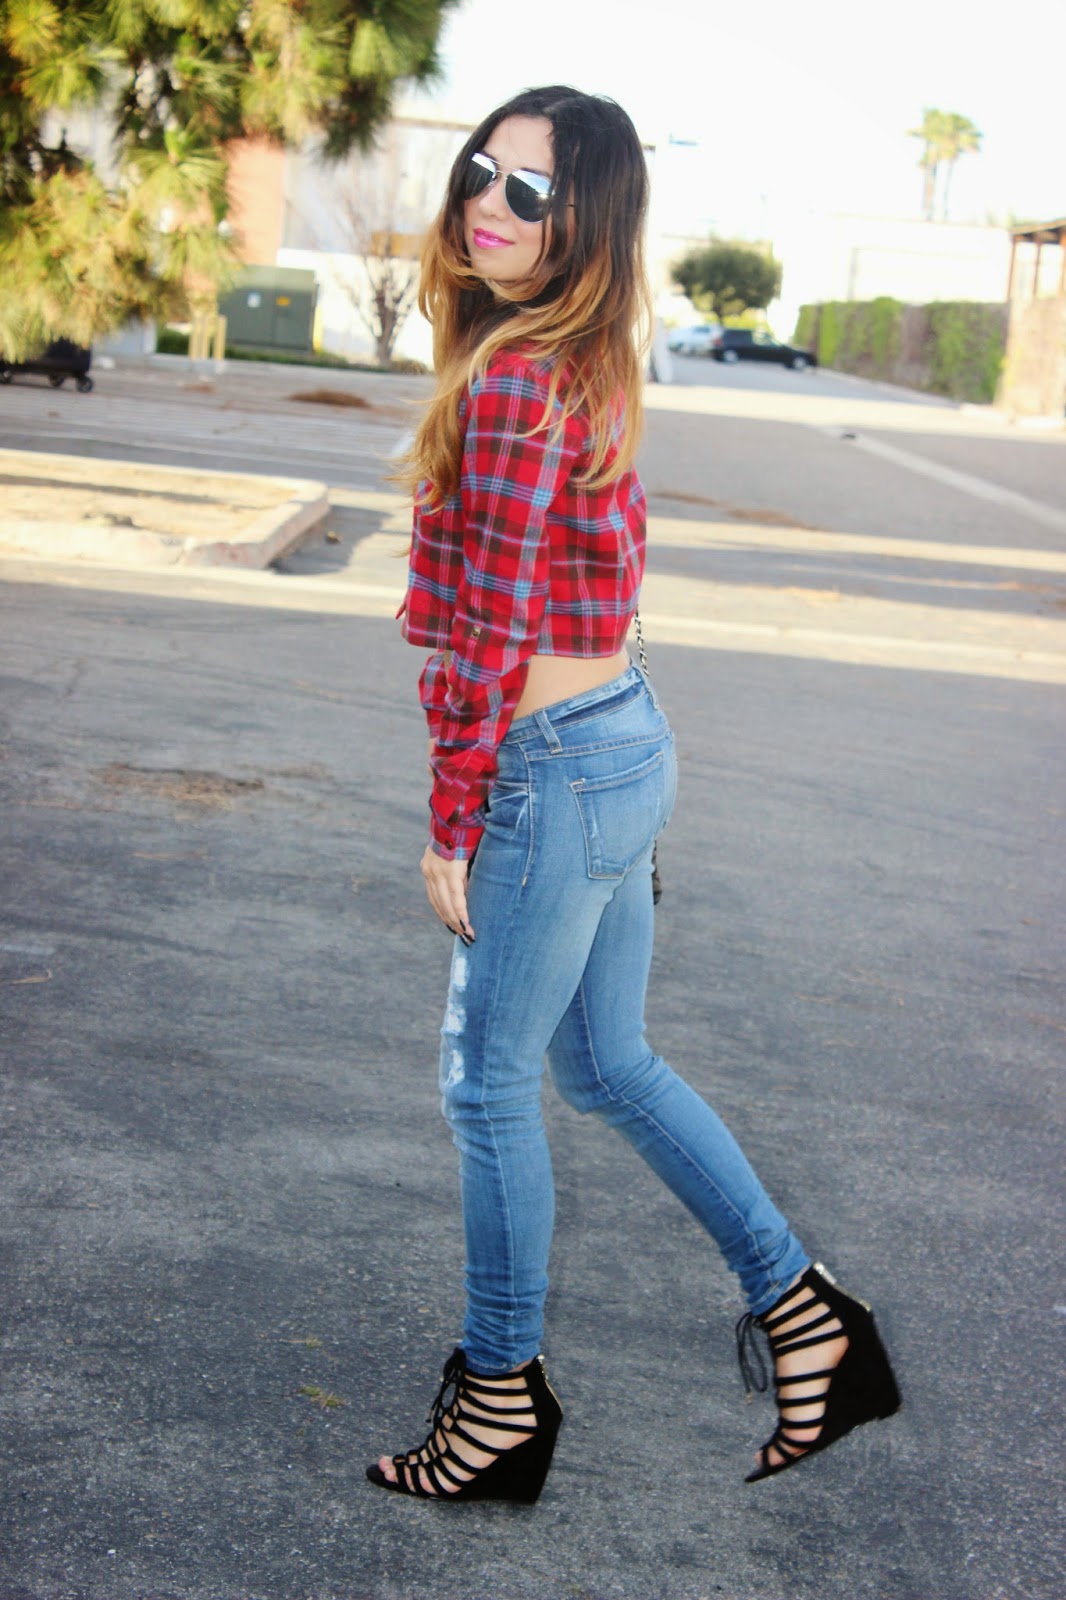 Flannel crop top and jeans!!! | Fashion by Vicky